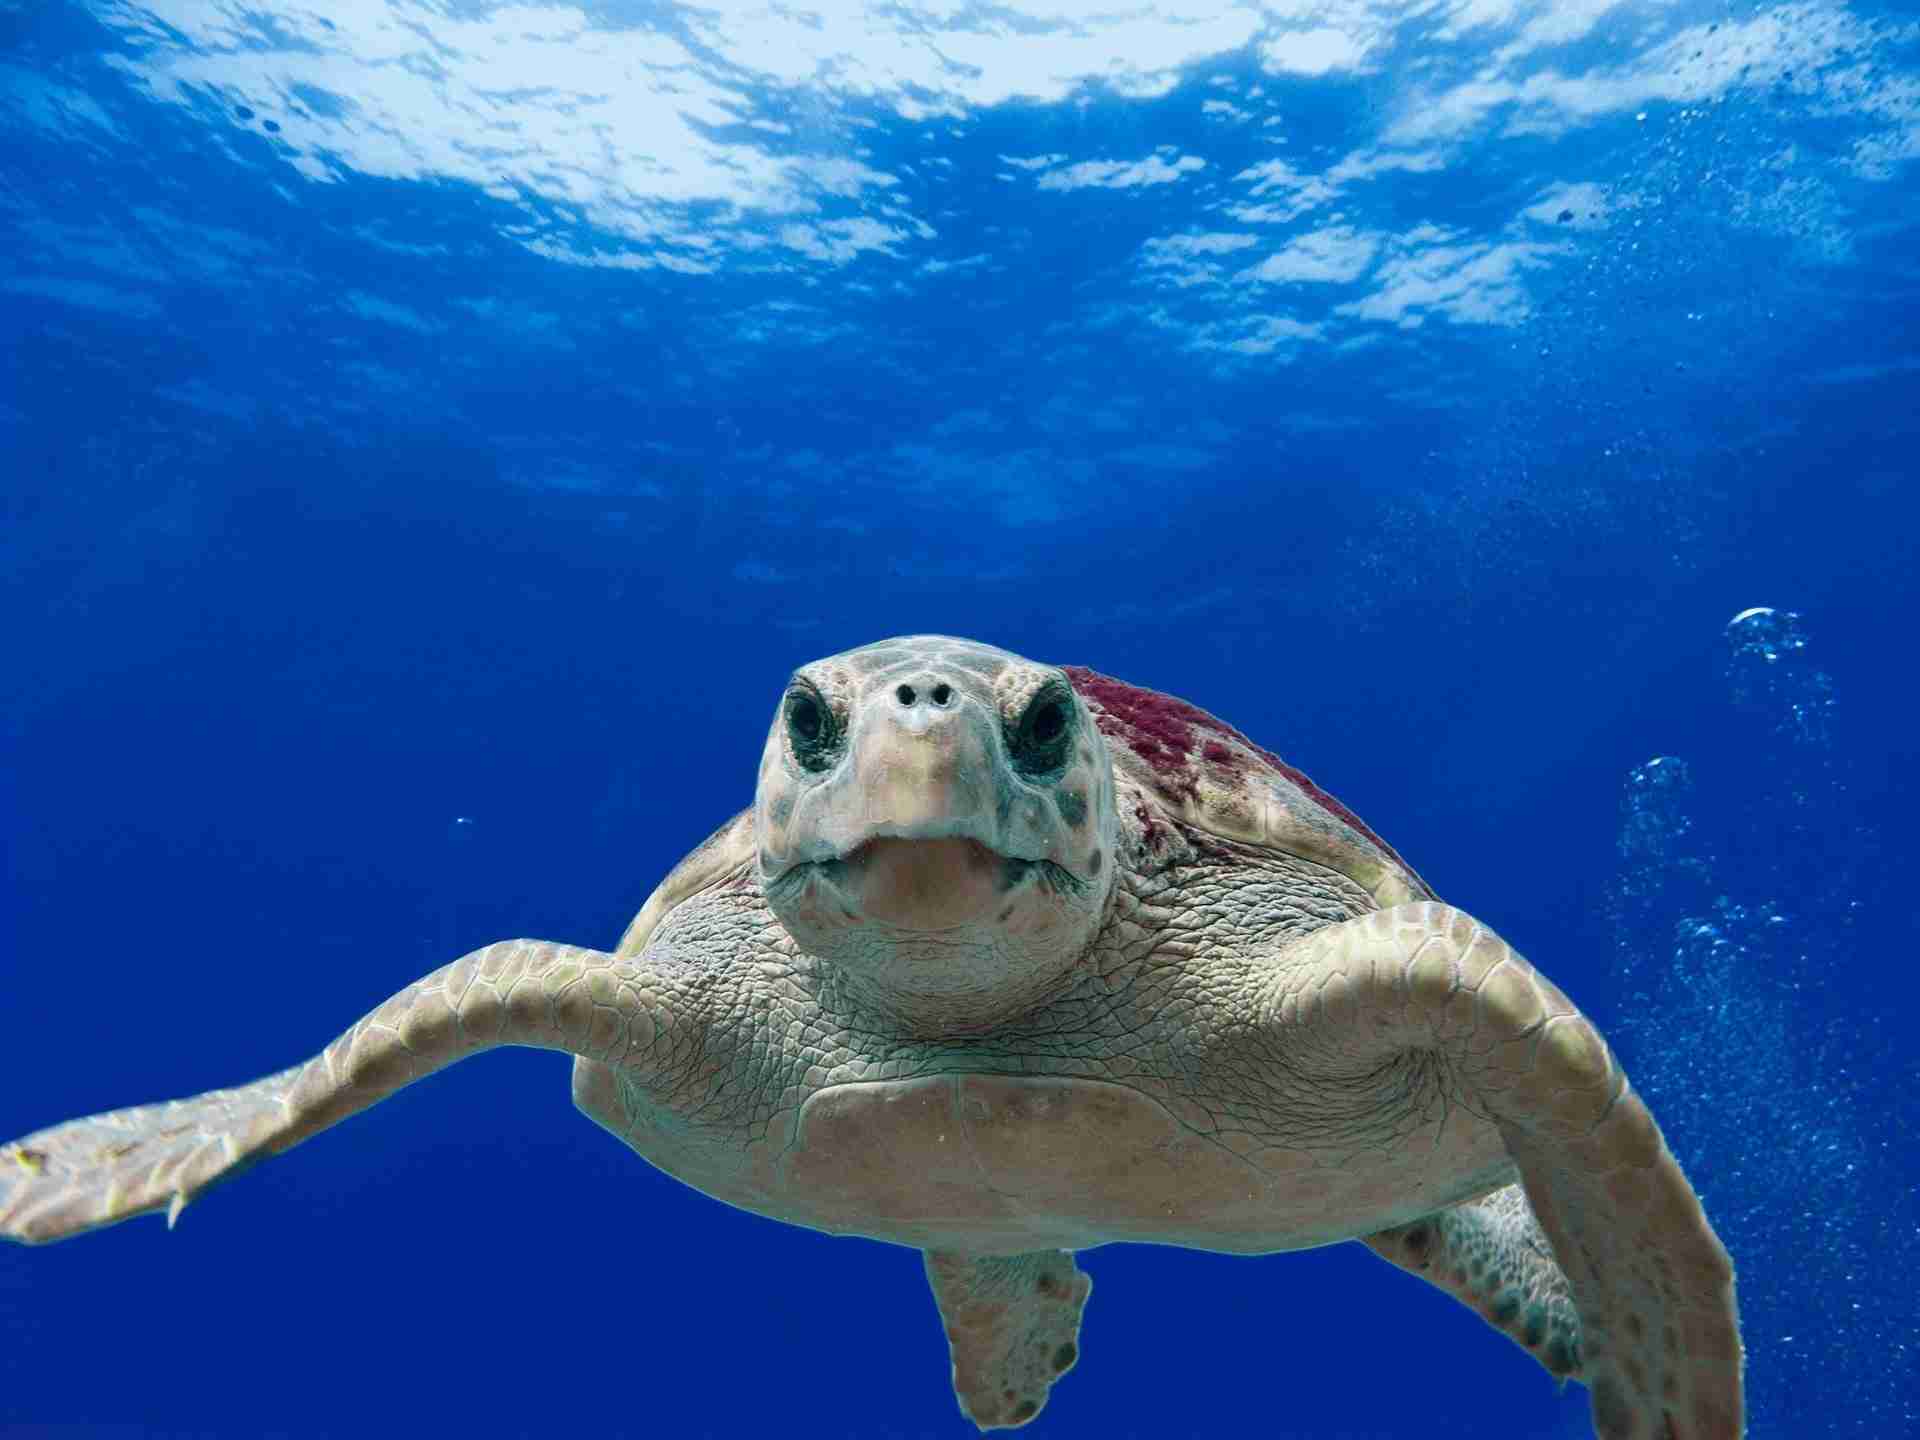 UPDATE: Born Free project – Solar power helps to save Italian Turtles